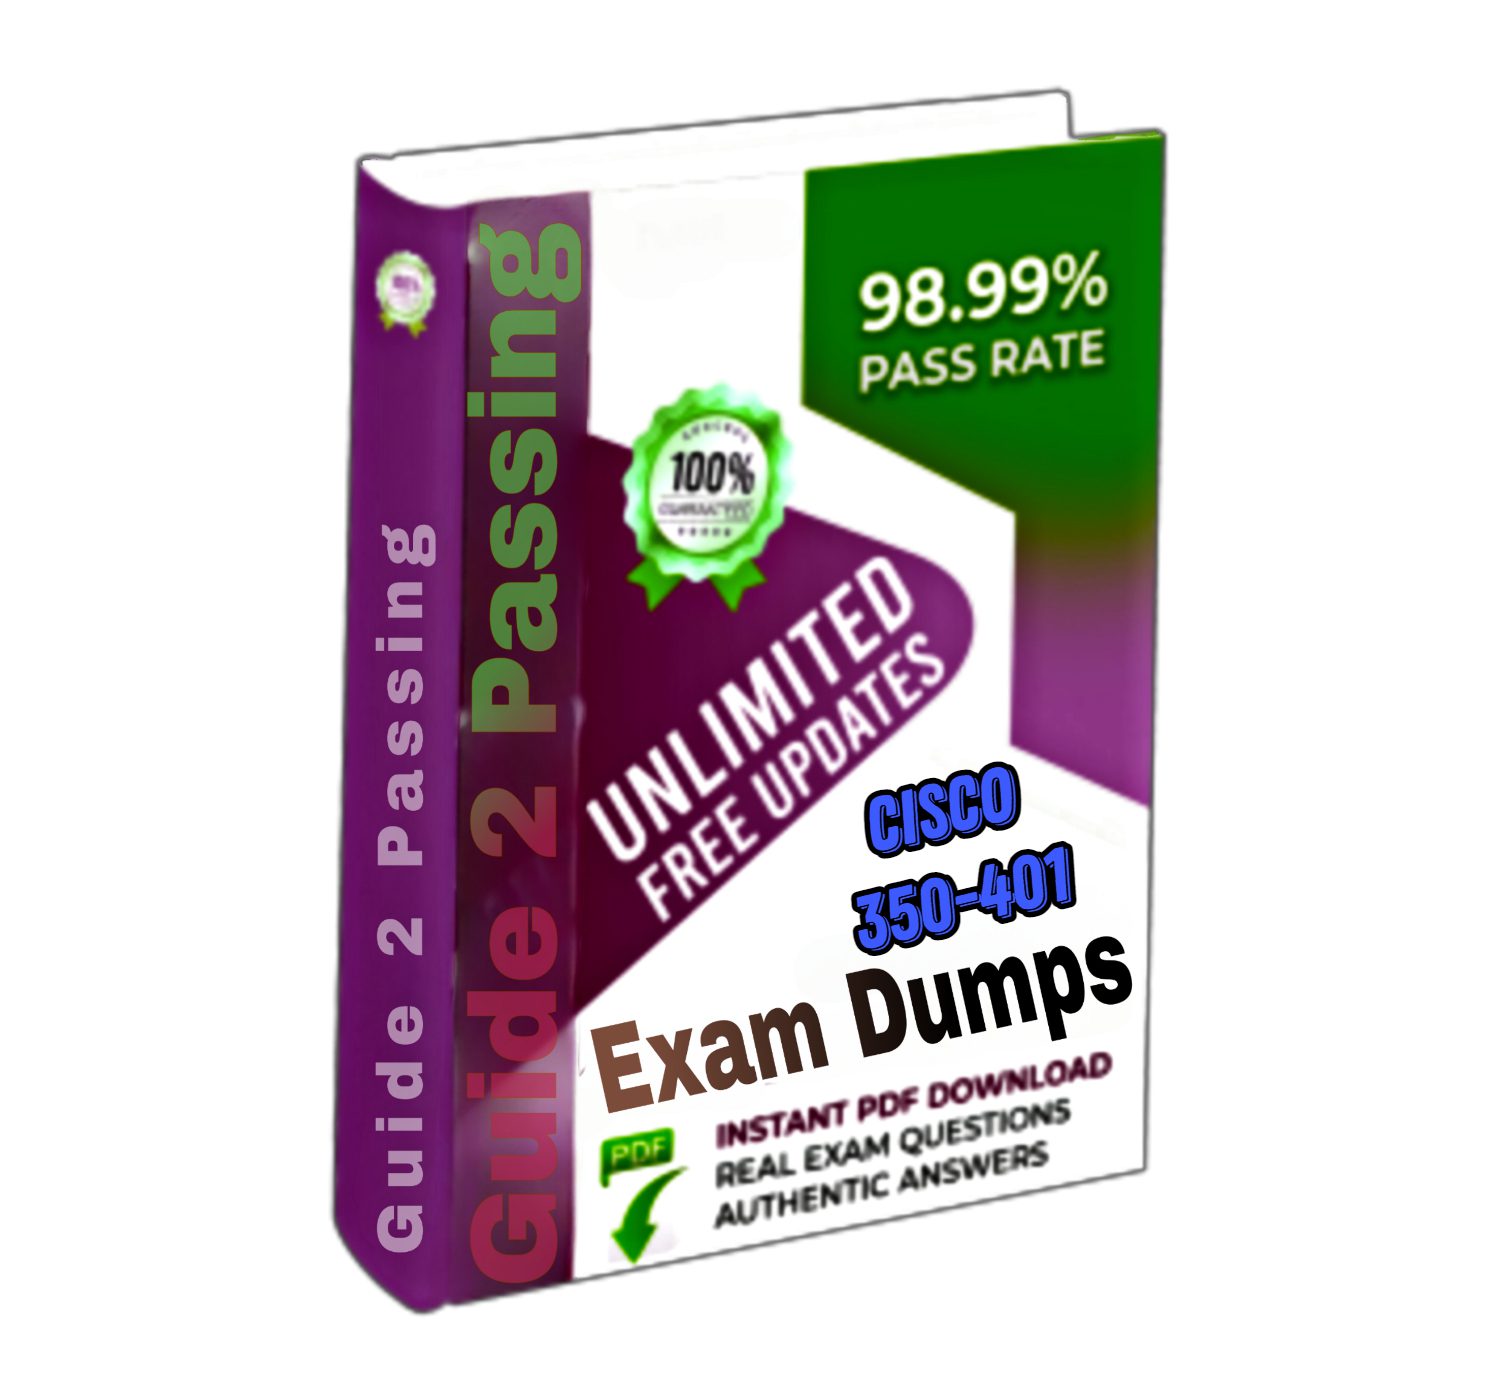 100% valid or Real Cisco 350-401 Exam Dumps Question